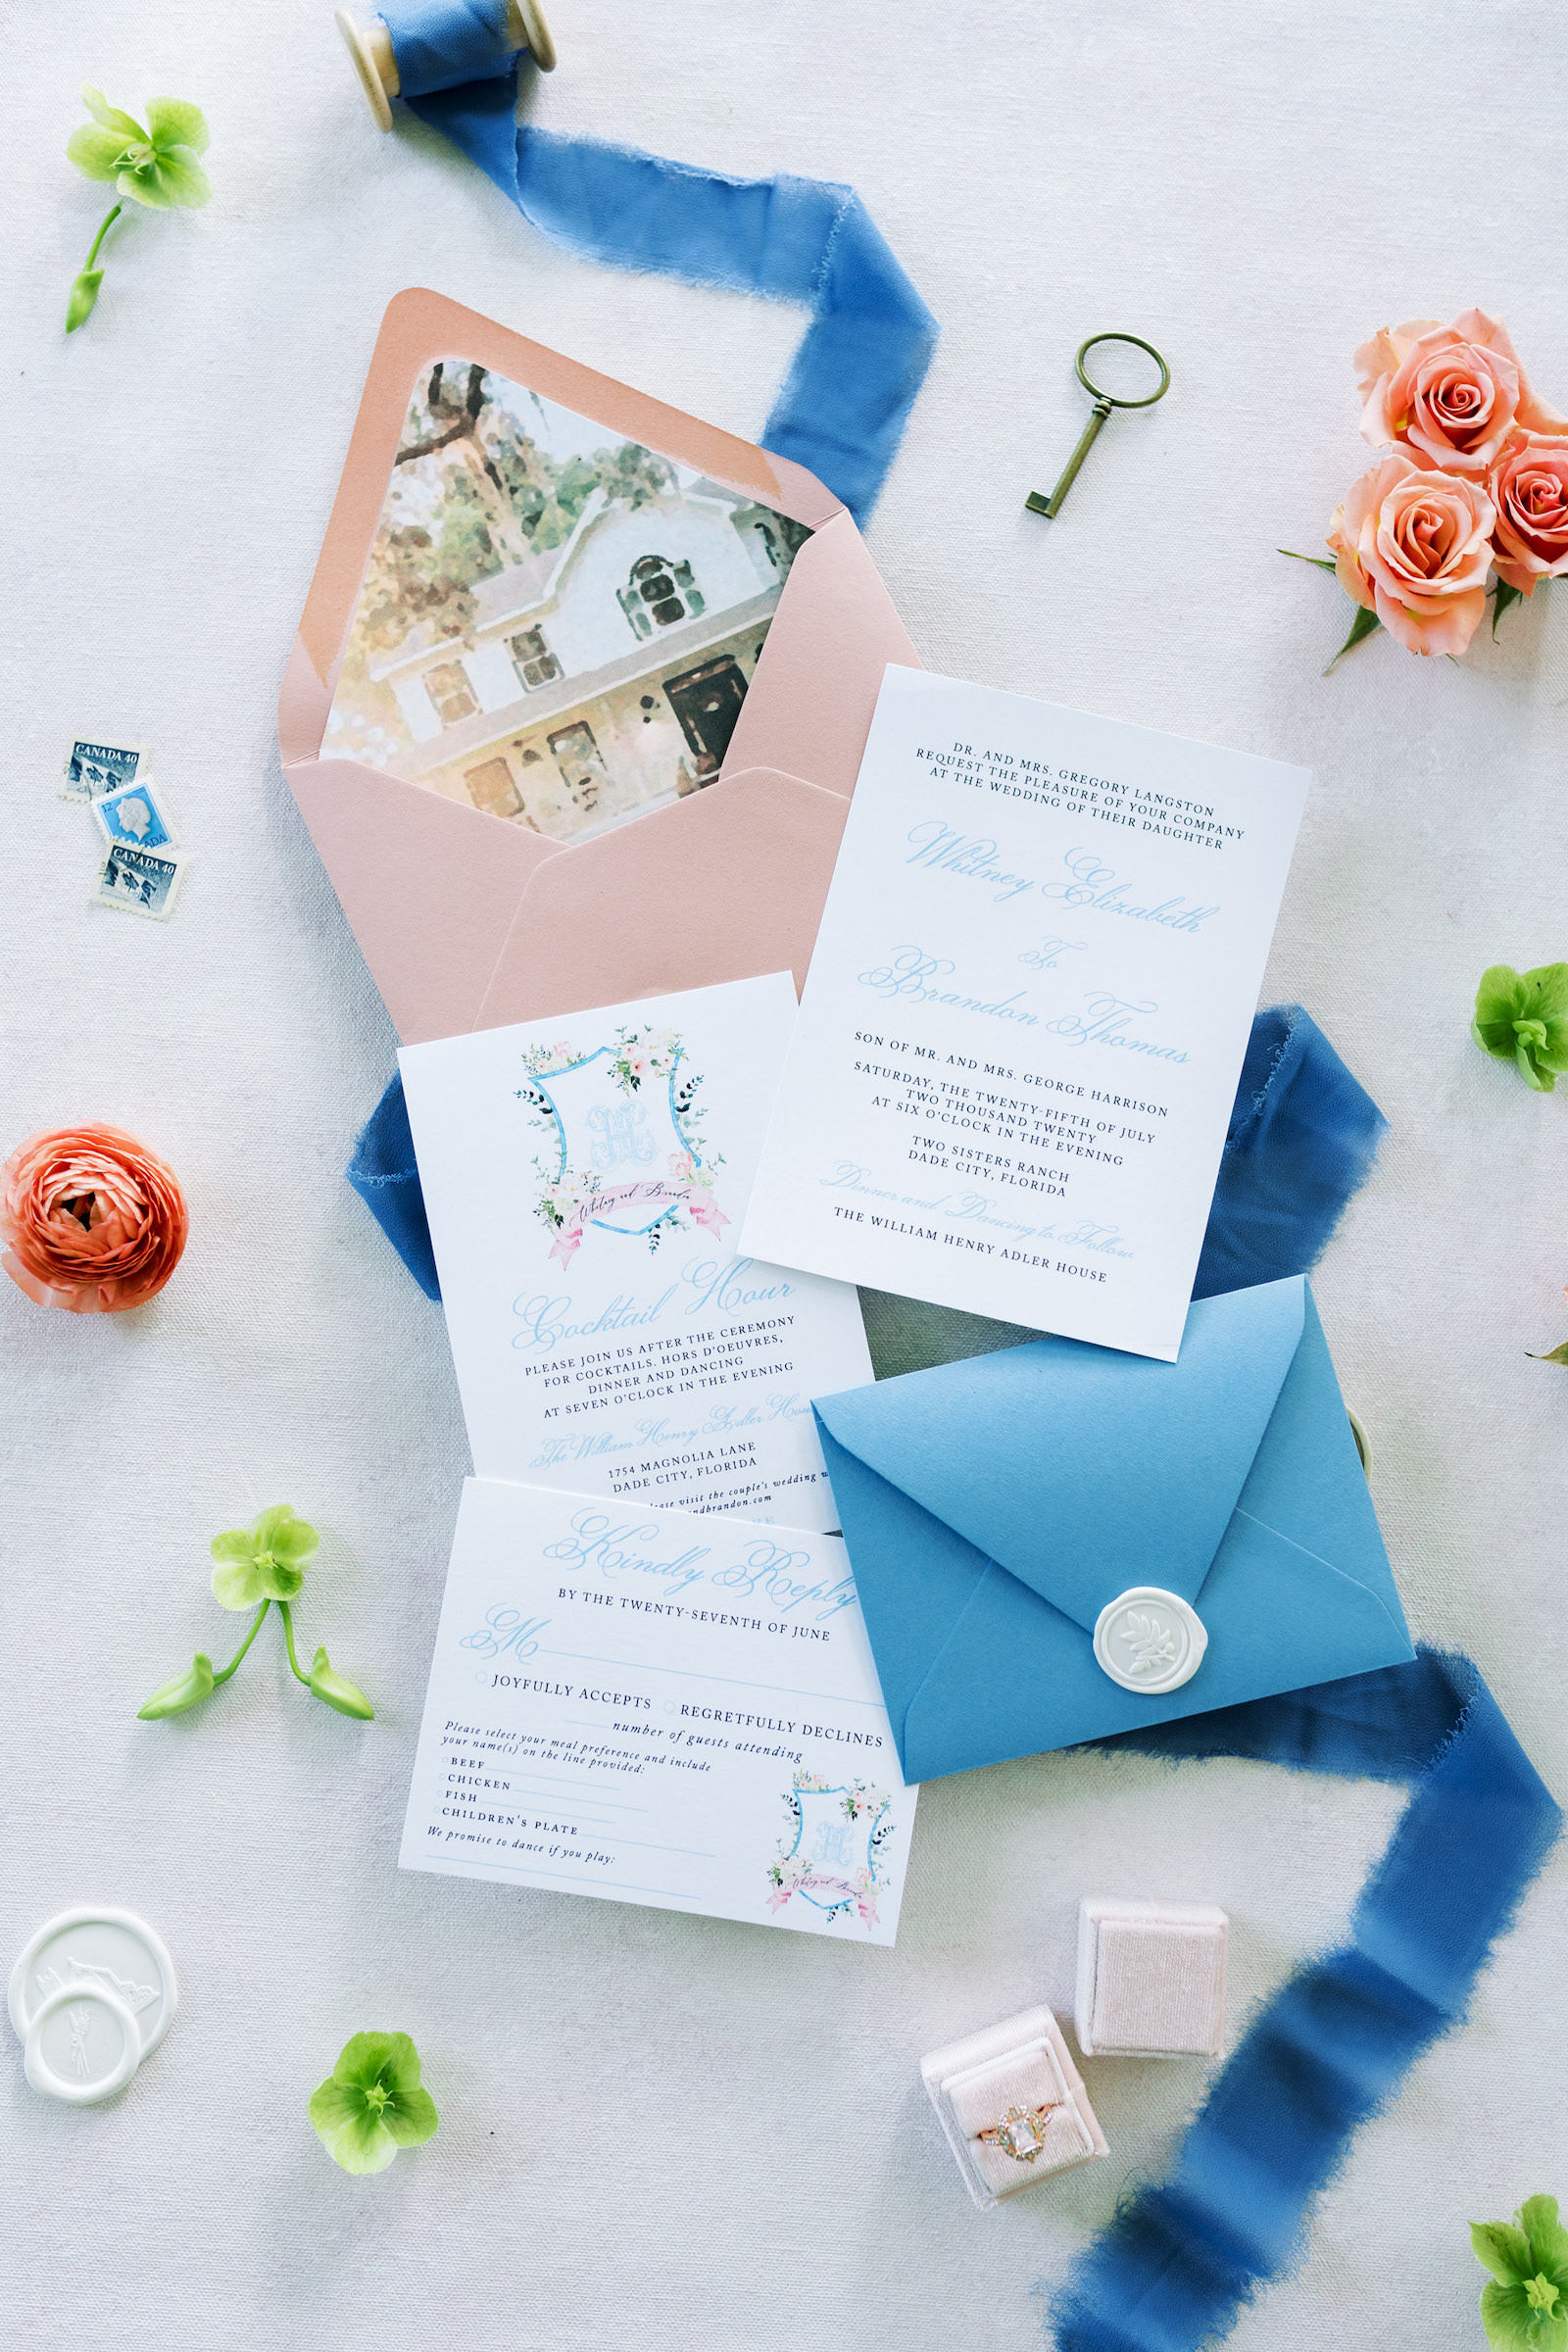 Southern Charm Inspired Wedding Invitation Suite, Blue Stationery with Blush Pink Envelope With Venue Image | Central Florida Luxury Wedding Planner EventFull Weddings